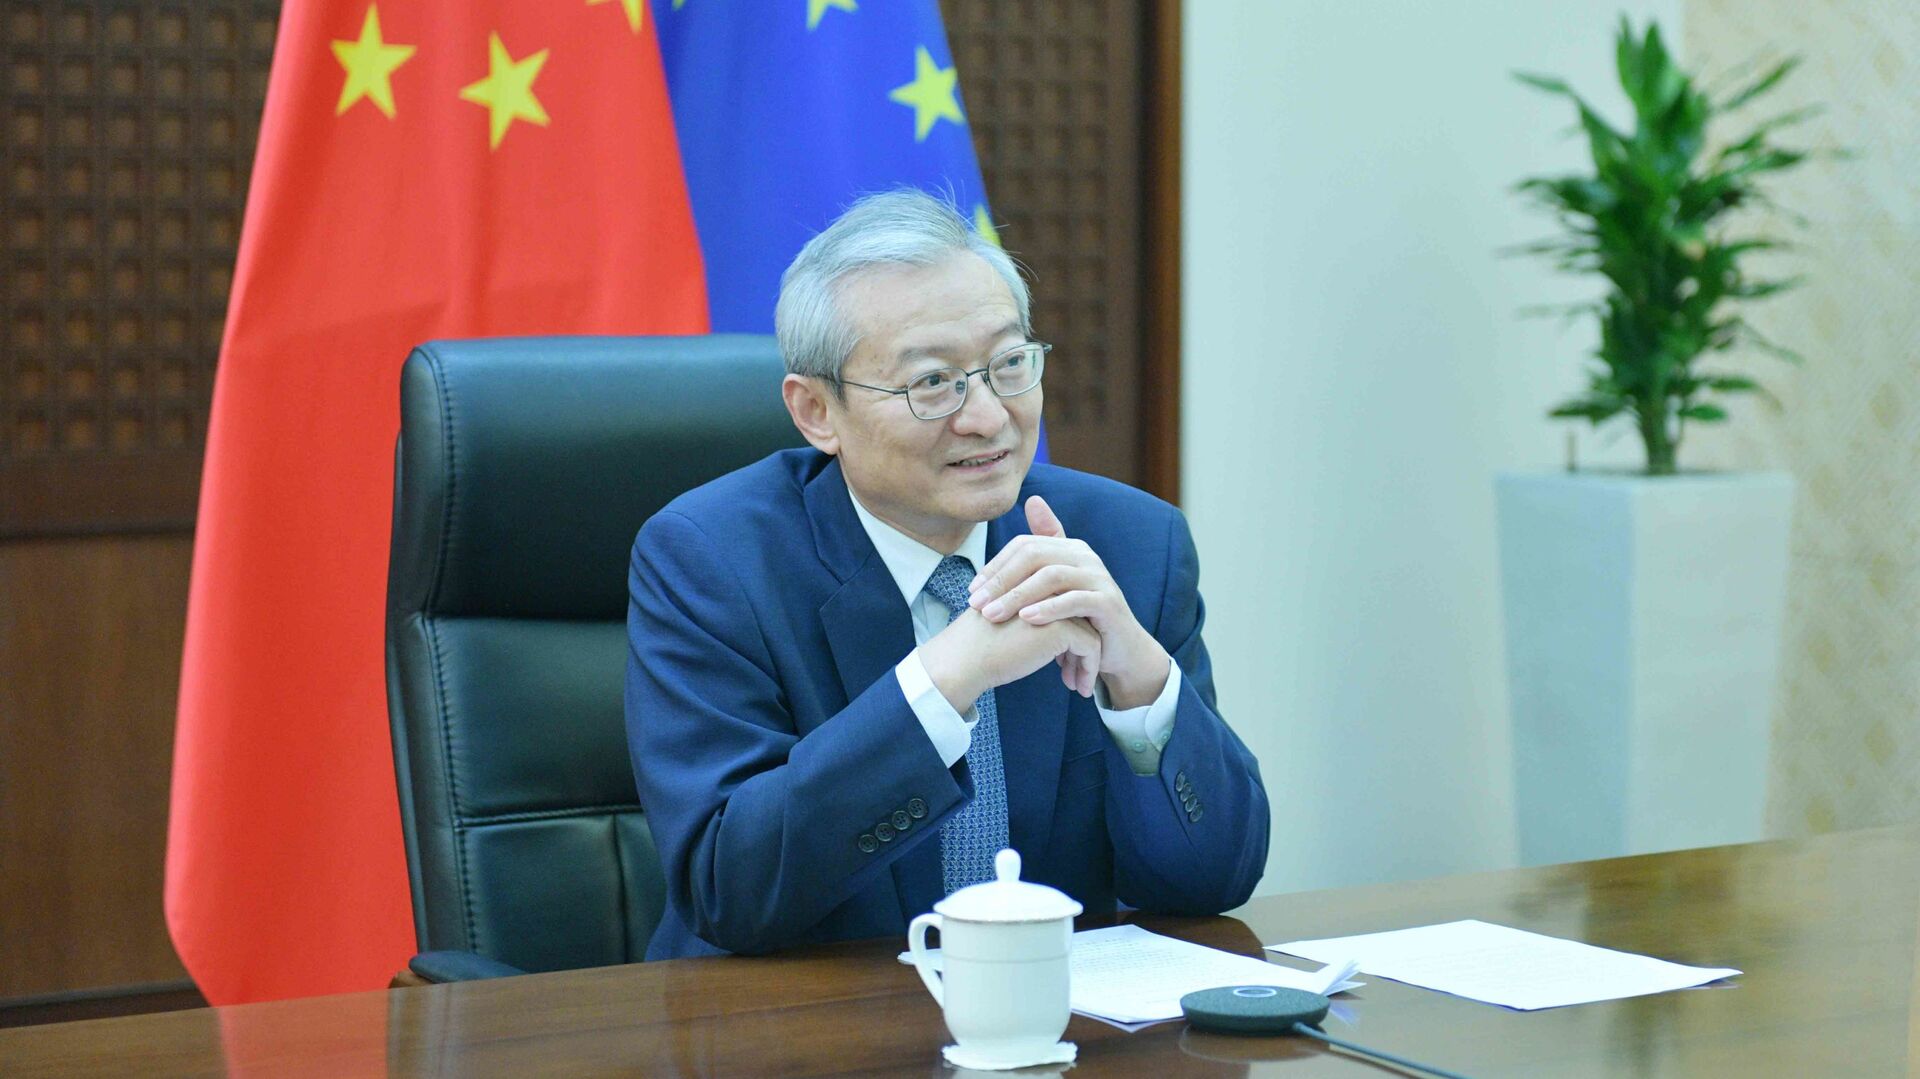 Ambassador Zhang Ming, Head of the Chinese Mission to the EU, gives an interview to CGTN Europe correspondent Nawied Jabarkhyl in June 2020 - Sputnik International, 1920, 17.03.2021